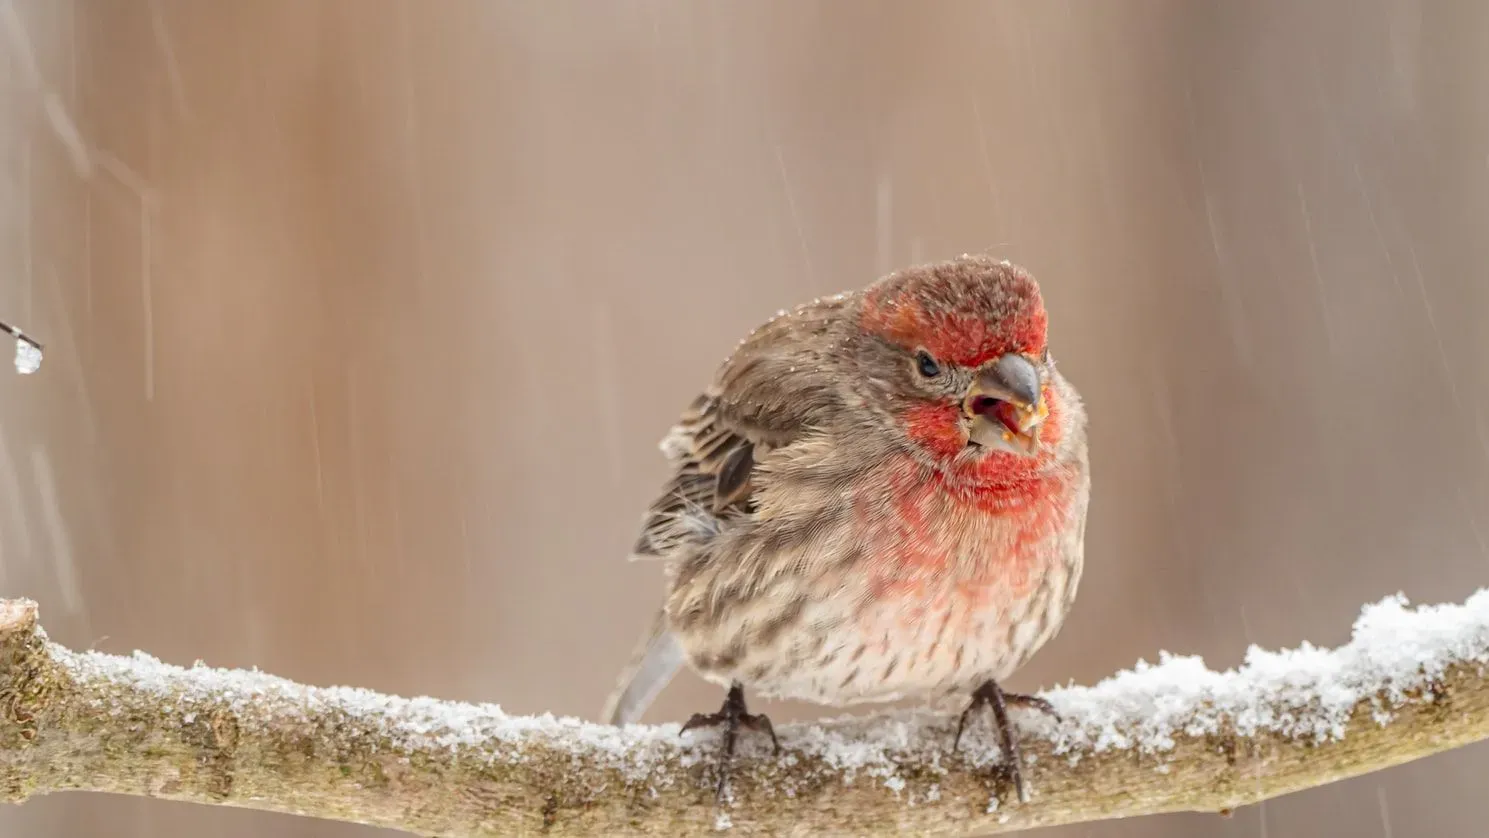 House finch facts that intrigue both adults and children alike.